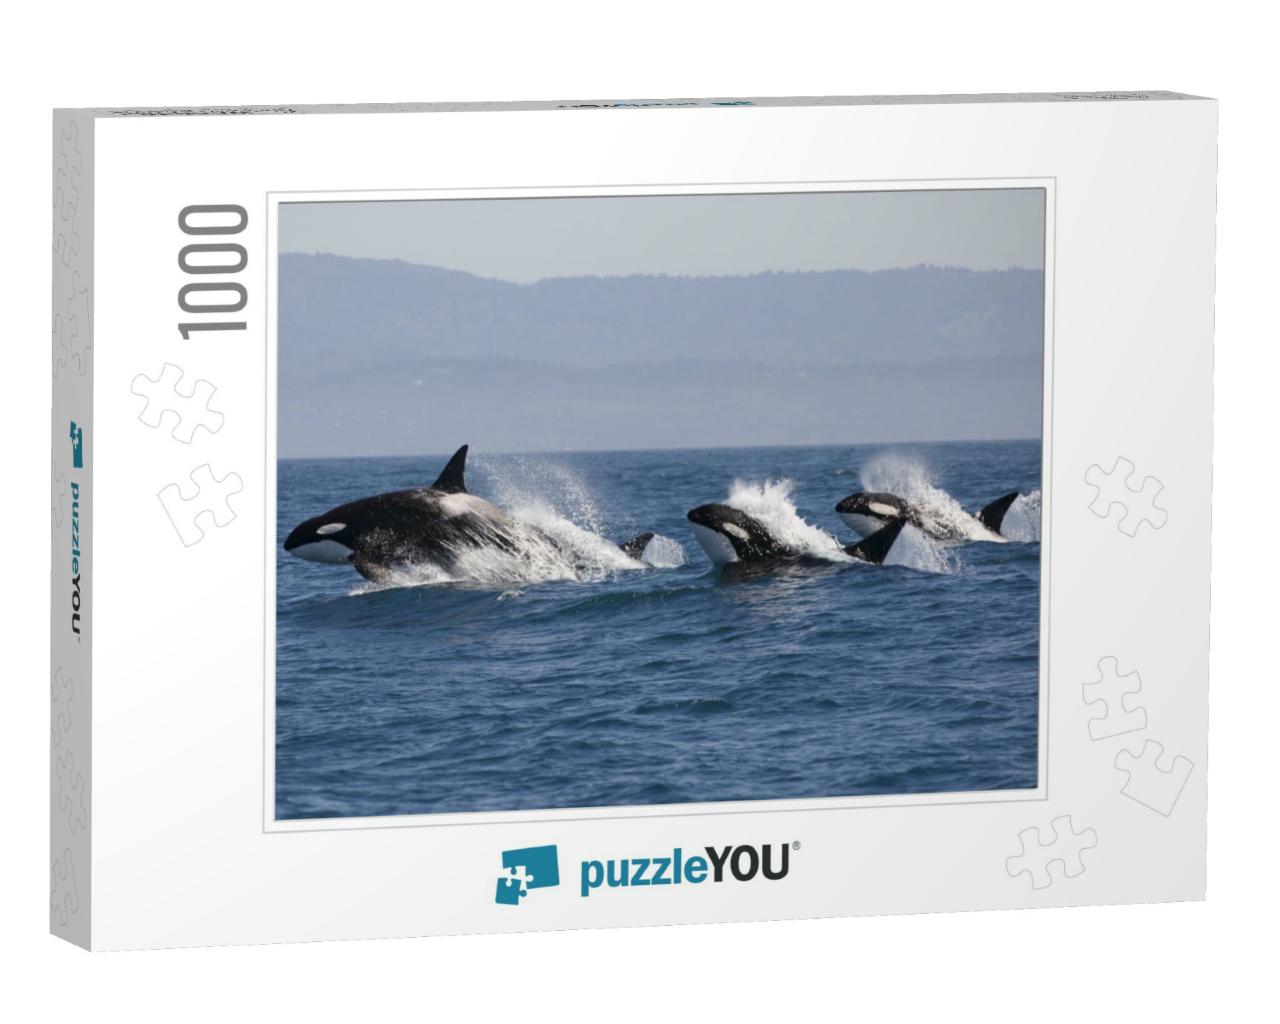 Killer Whale - Orcinus Orca... Jigsaw Puzzle with 1000 pieces